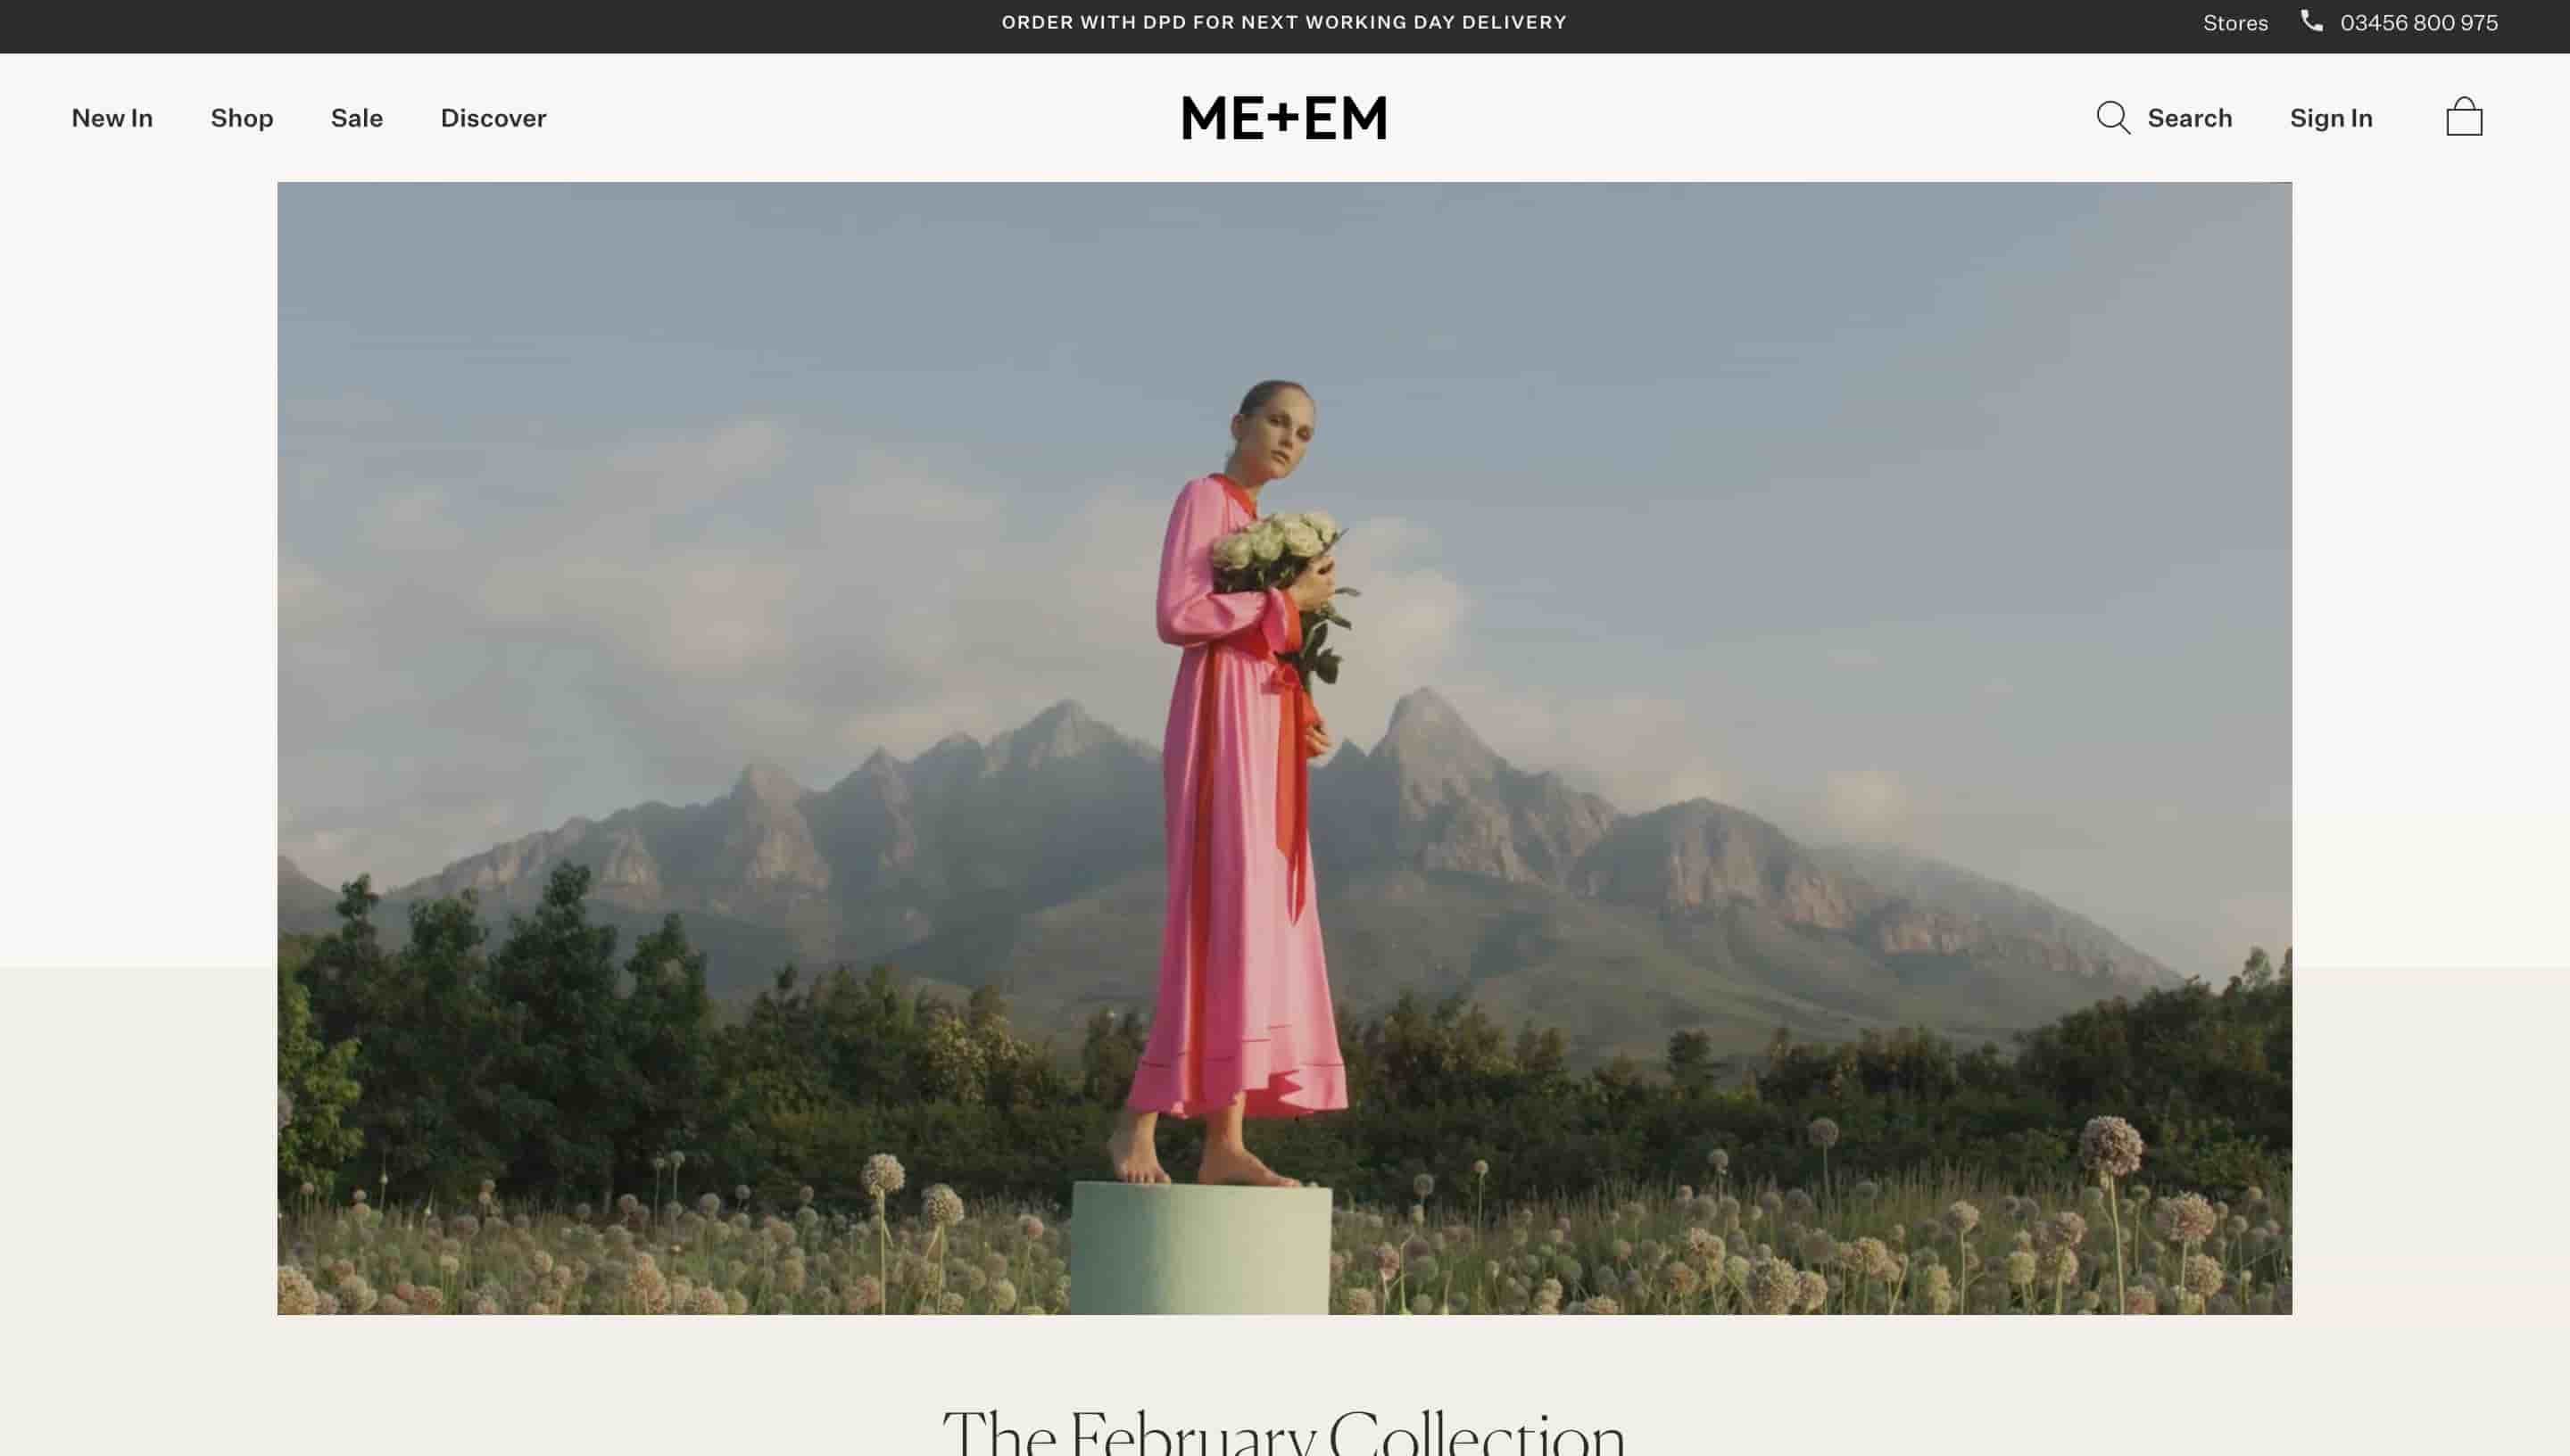 fashion website design me + em shows person wearing dress standing on a platform with flowers and mountains in the background